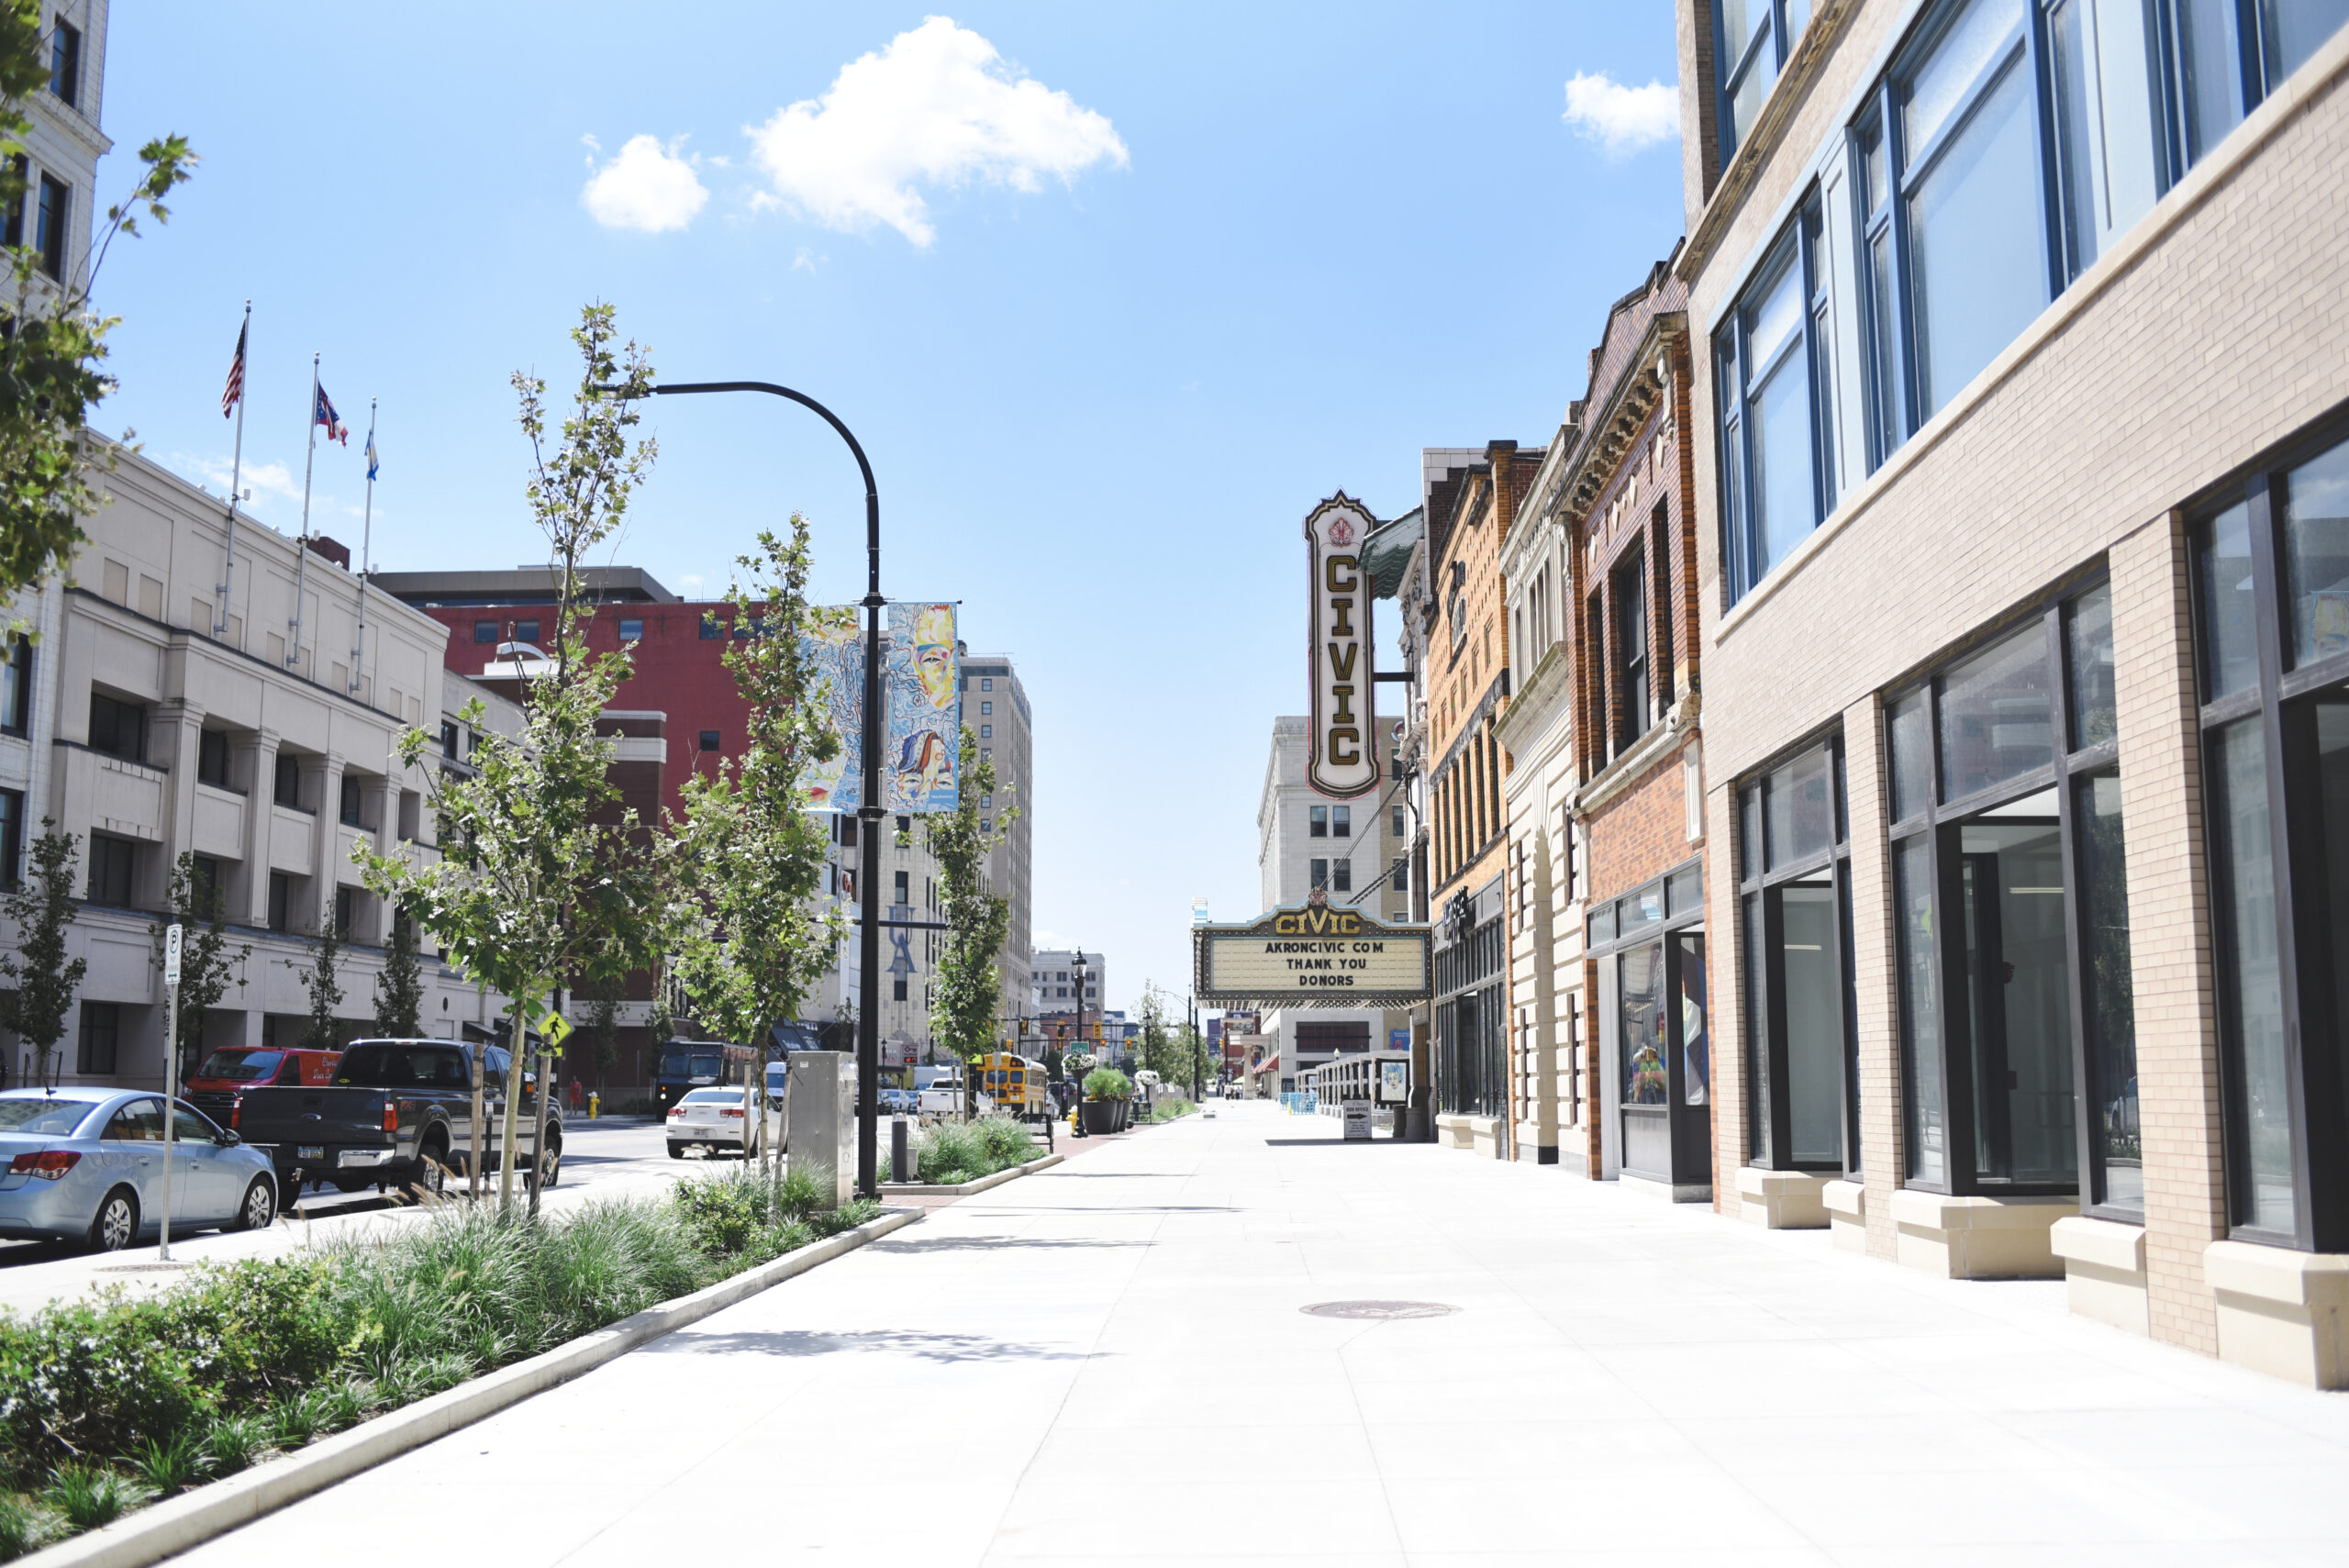 Proactive grant to help with equitable downtown development 